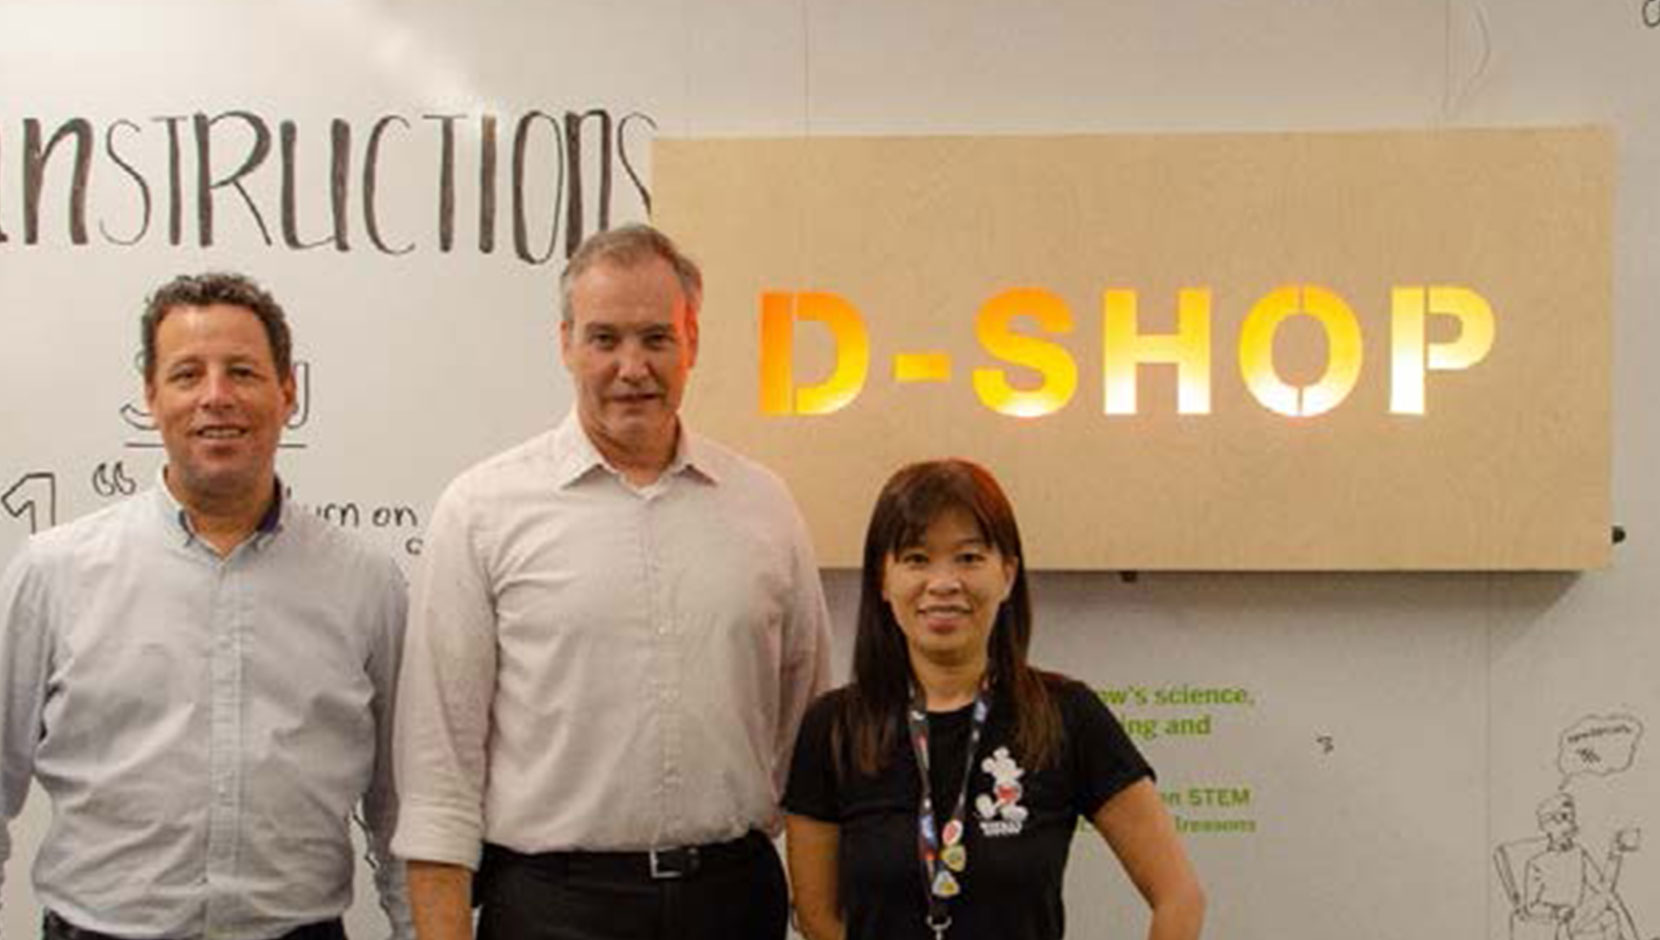 3 SAP staff members from facilities and the D-Shop, standing in front of the sign for D-Shop.